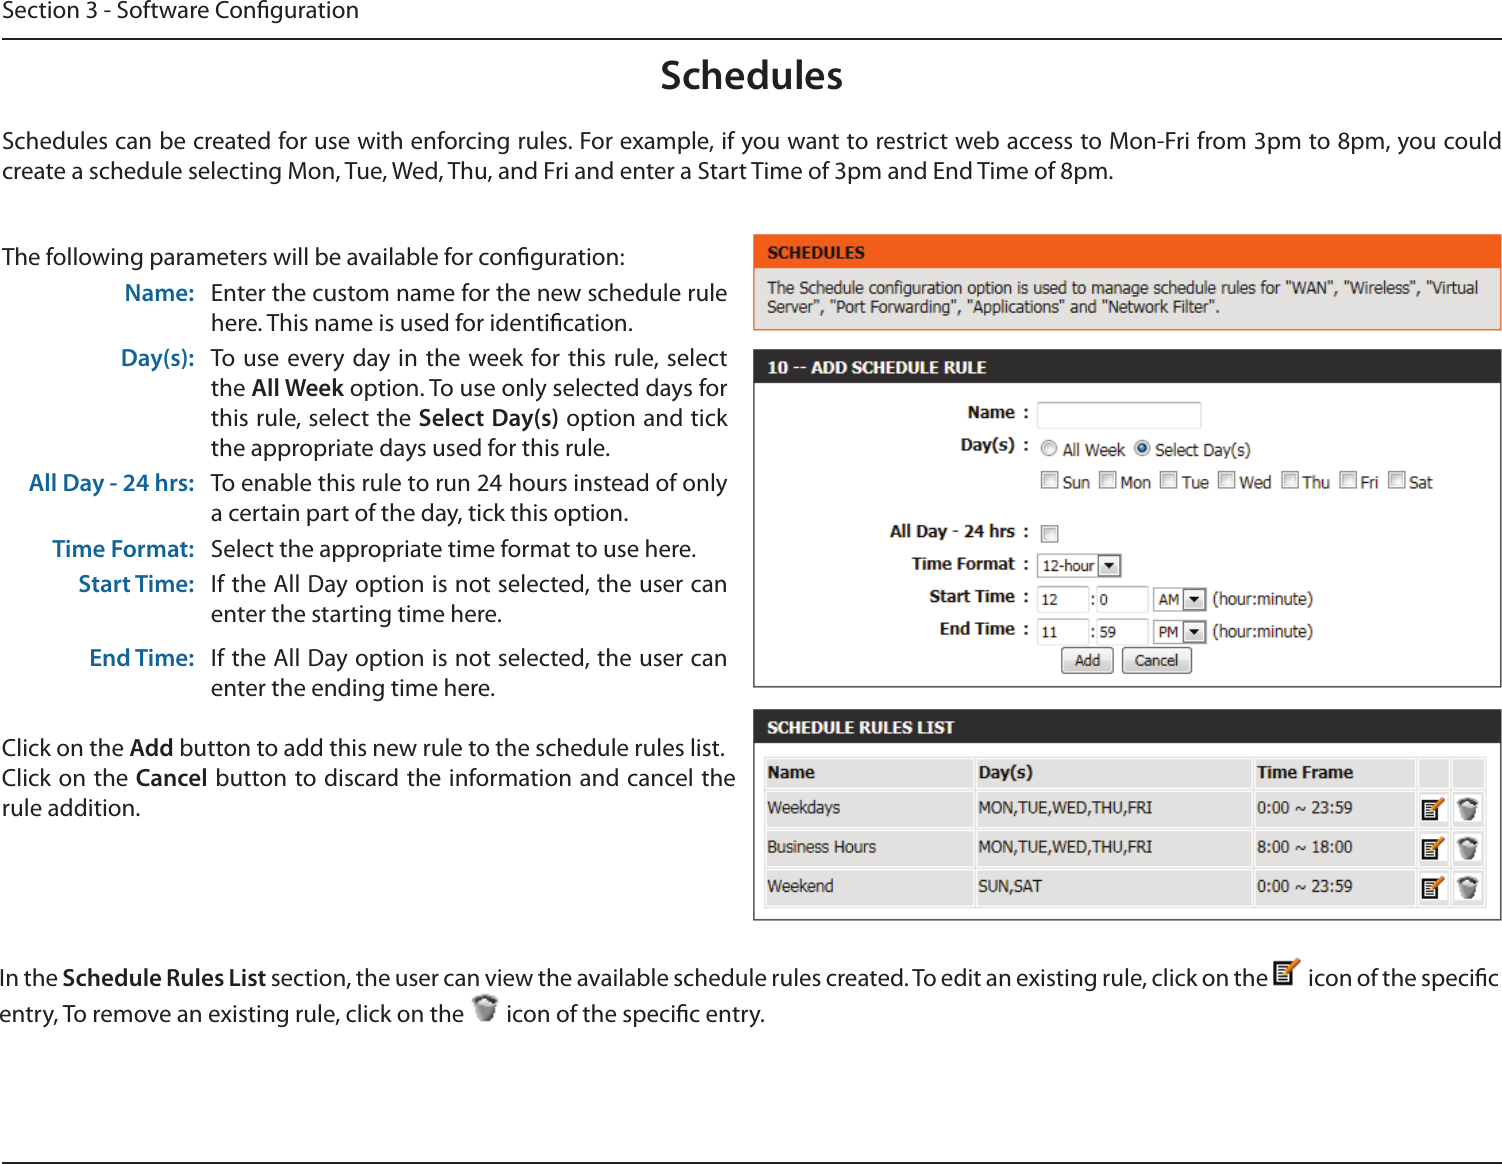 Section 3 - Software CongurationSchedulesThe following parameters will be available for conguration:Name: Enter the custom name for the new schedule rule here. This name is used for identication.Day(s): To use  every day in  the week for this rule, select the All Week option. To use only selected days for this rule, select the Select Day(s) option and tick the appropriate days used for this rule.All Day - 24 hrs: To enable this rule to run 24 hours instead of only a certain part of the day, tick this option.Time Format: Select the appropriate time format to use here.Start Time: If the All Day option is not selected, the user can enter the starting time here.End Time: If the All Day option is not selected, the user can enter the ending time here.Click on the Add button to add this new rule to the schedule rules list.Click on the Cancel button to discard the information and cancel the rule addition.In the Schedule Rules List section, the user can view the available schedule rules created. To edit an existing rule, click on the   icon of the specic entry, To remove an existing rule, click on the   icon of the specic entry.Schedules can be created for use with enforcing rules. For example, if you want to restrict web access to Mon-Fri from 3pm to 8pm, you could create a schedule selecting Mon, Tue, Wed, Thu, and Fri and enter a Start Time of 3pm and End Time of 8pm.